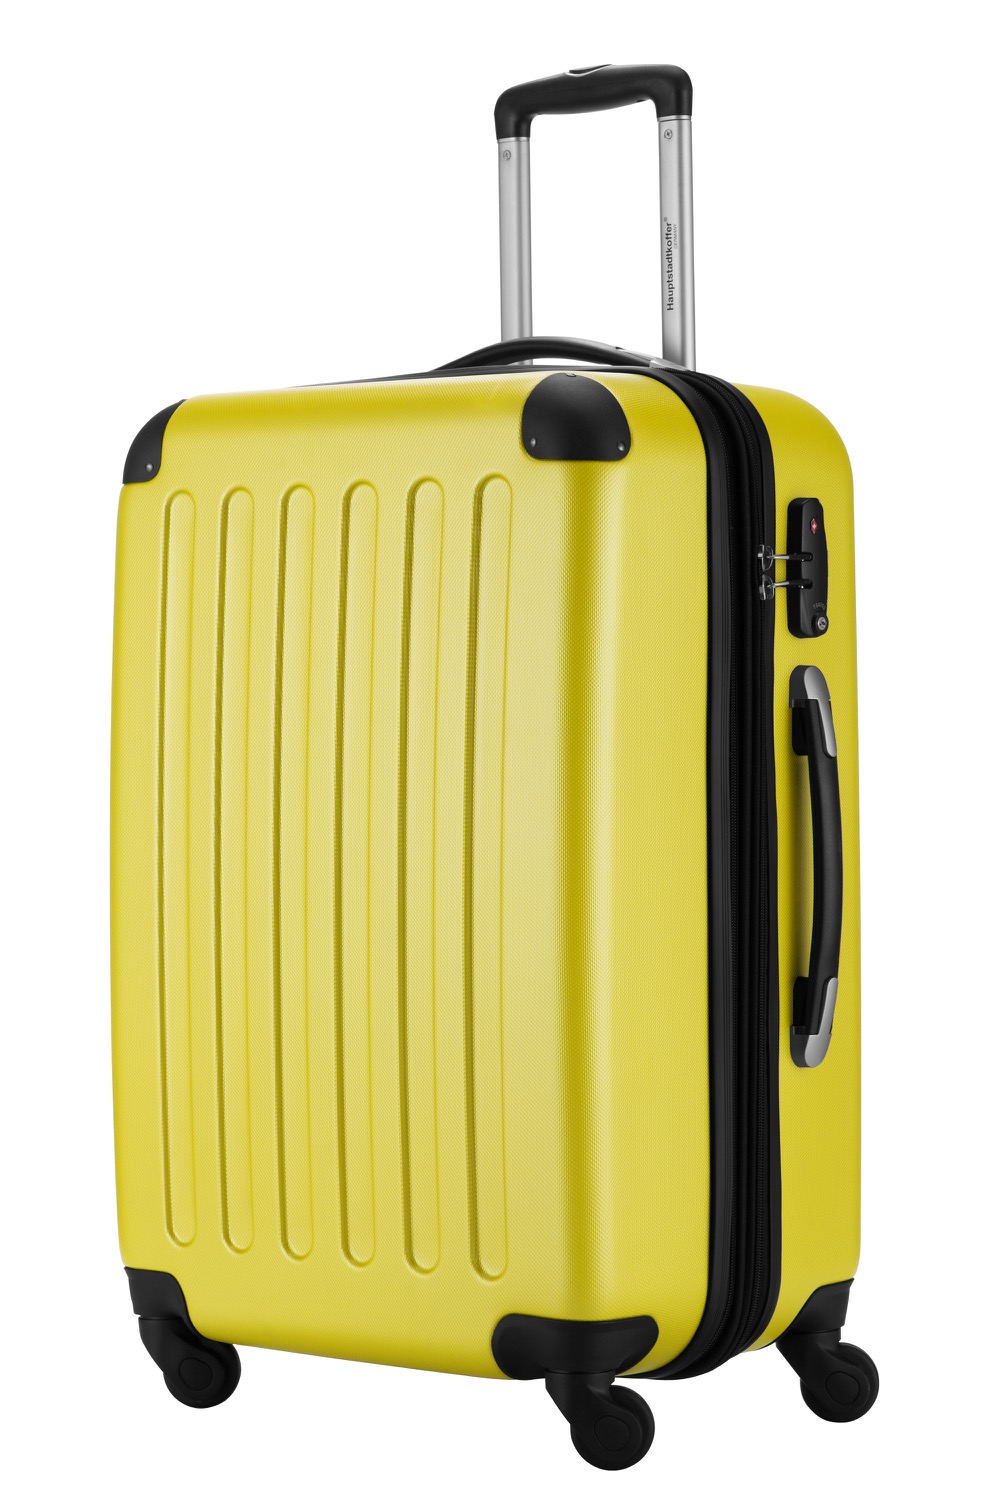 80 liter luggage suitcase baggage trolley case bag hard shell yellow ...